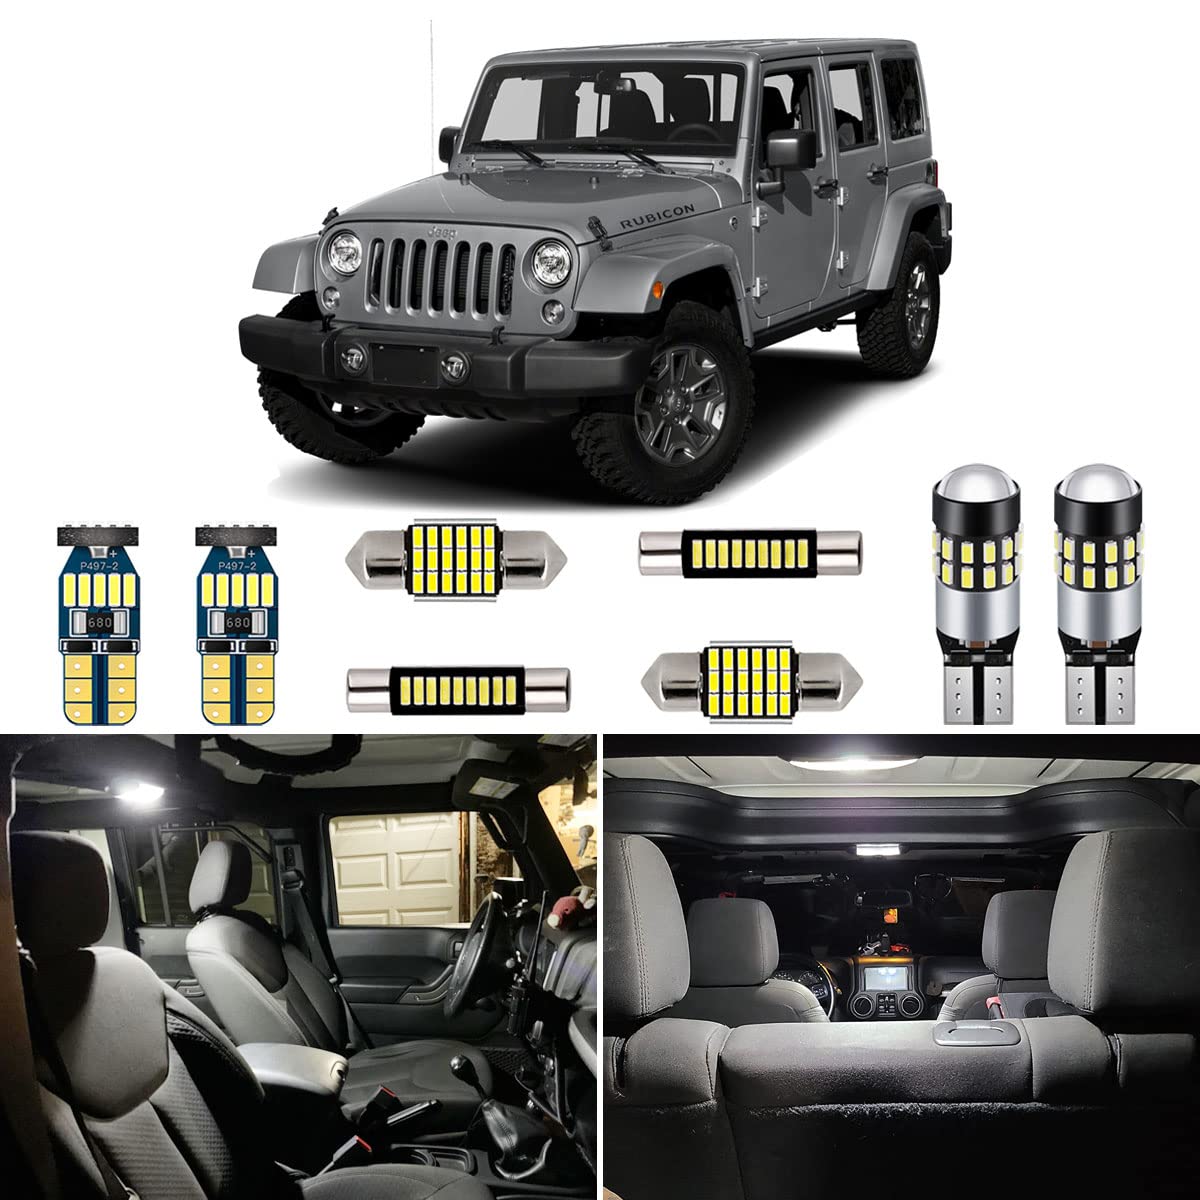 Amazon.com: AUTOGINE 6 Piece CANBUS LED Interior Light Kit for Jeep  Wrangler JK 4-Door 2007 2008 2009 2010 2011 2012 2013 2014 2015 2016 2017  2018 Super Bright 6000K White LED Bulbs Package + Install Tool : Everything  Else